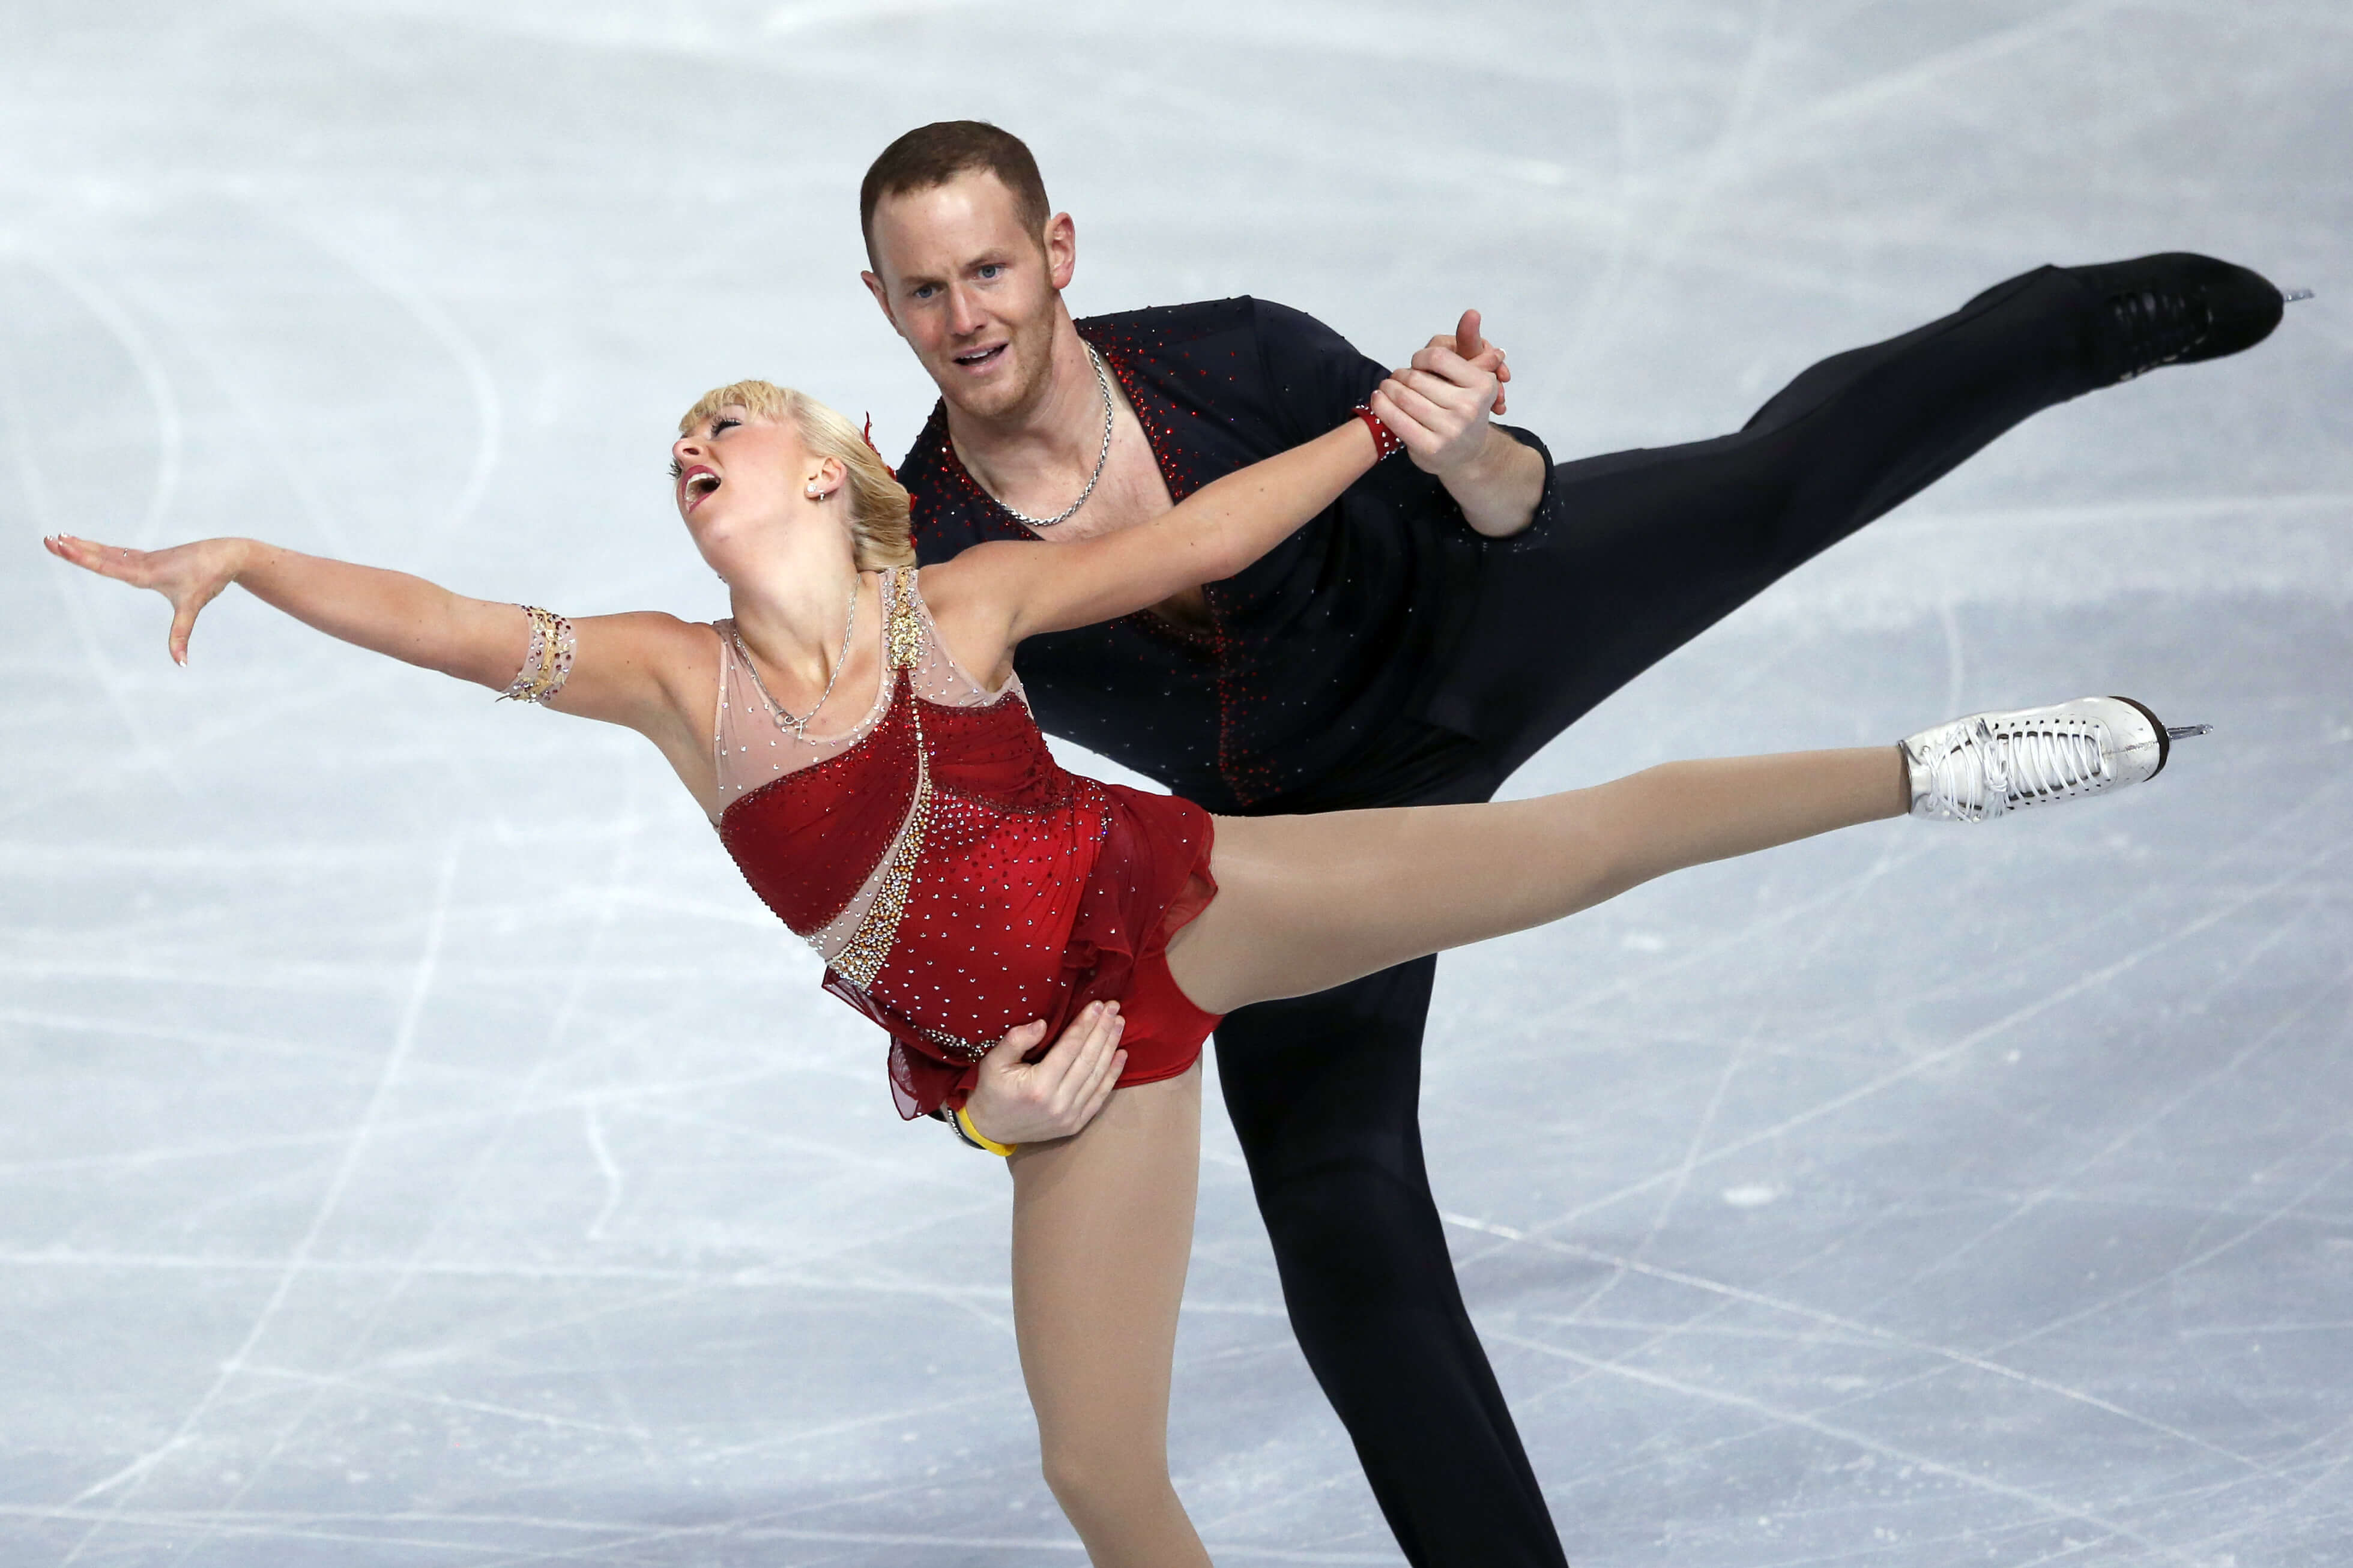 Caydee Denney and John Coughlin perform during their pairs short program during the ISU Figure Skating Eric Bompard Trophy at Bercy arena in Paris on Nov. 15, 2013.